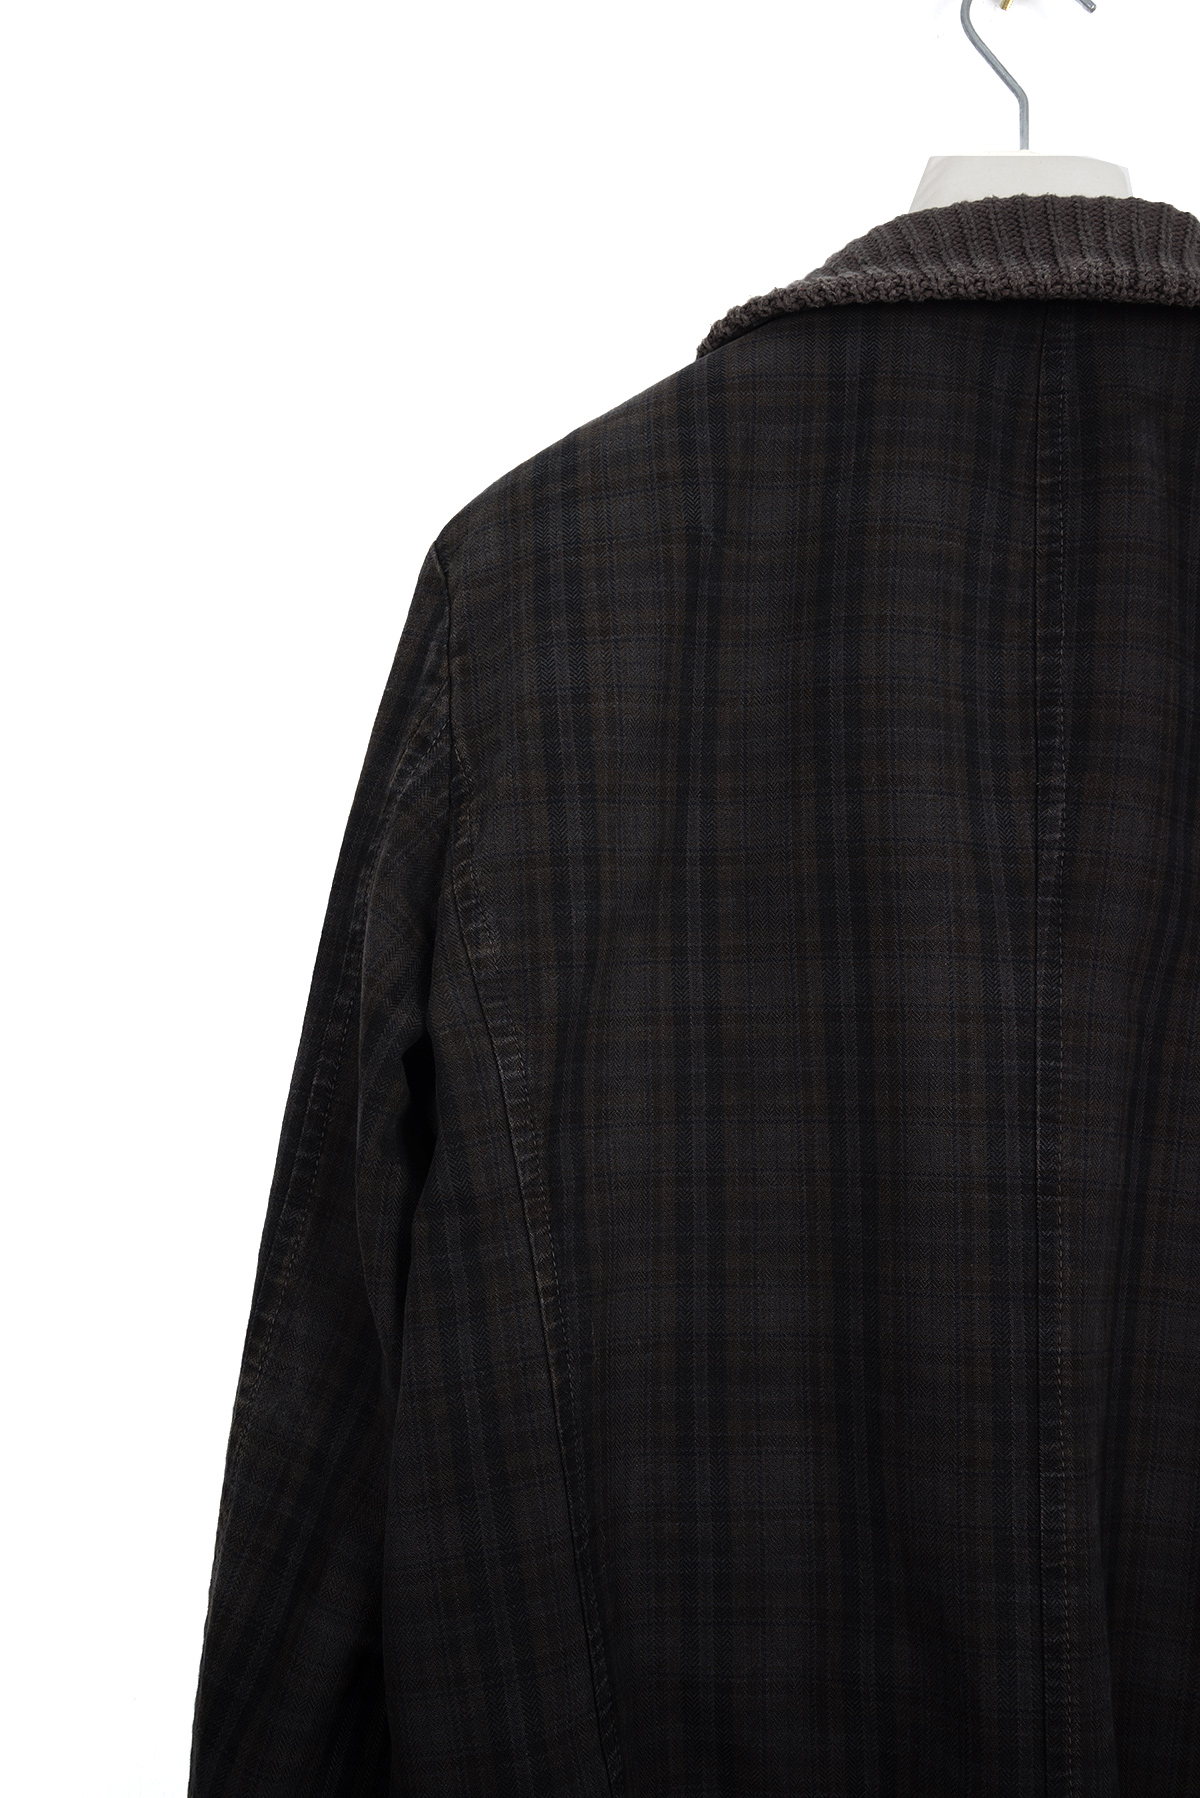 2006 A/W SHAWL COLLAR JACKET IN OVERDYED COTTON - 8